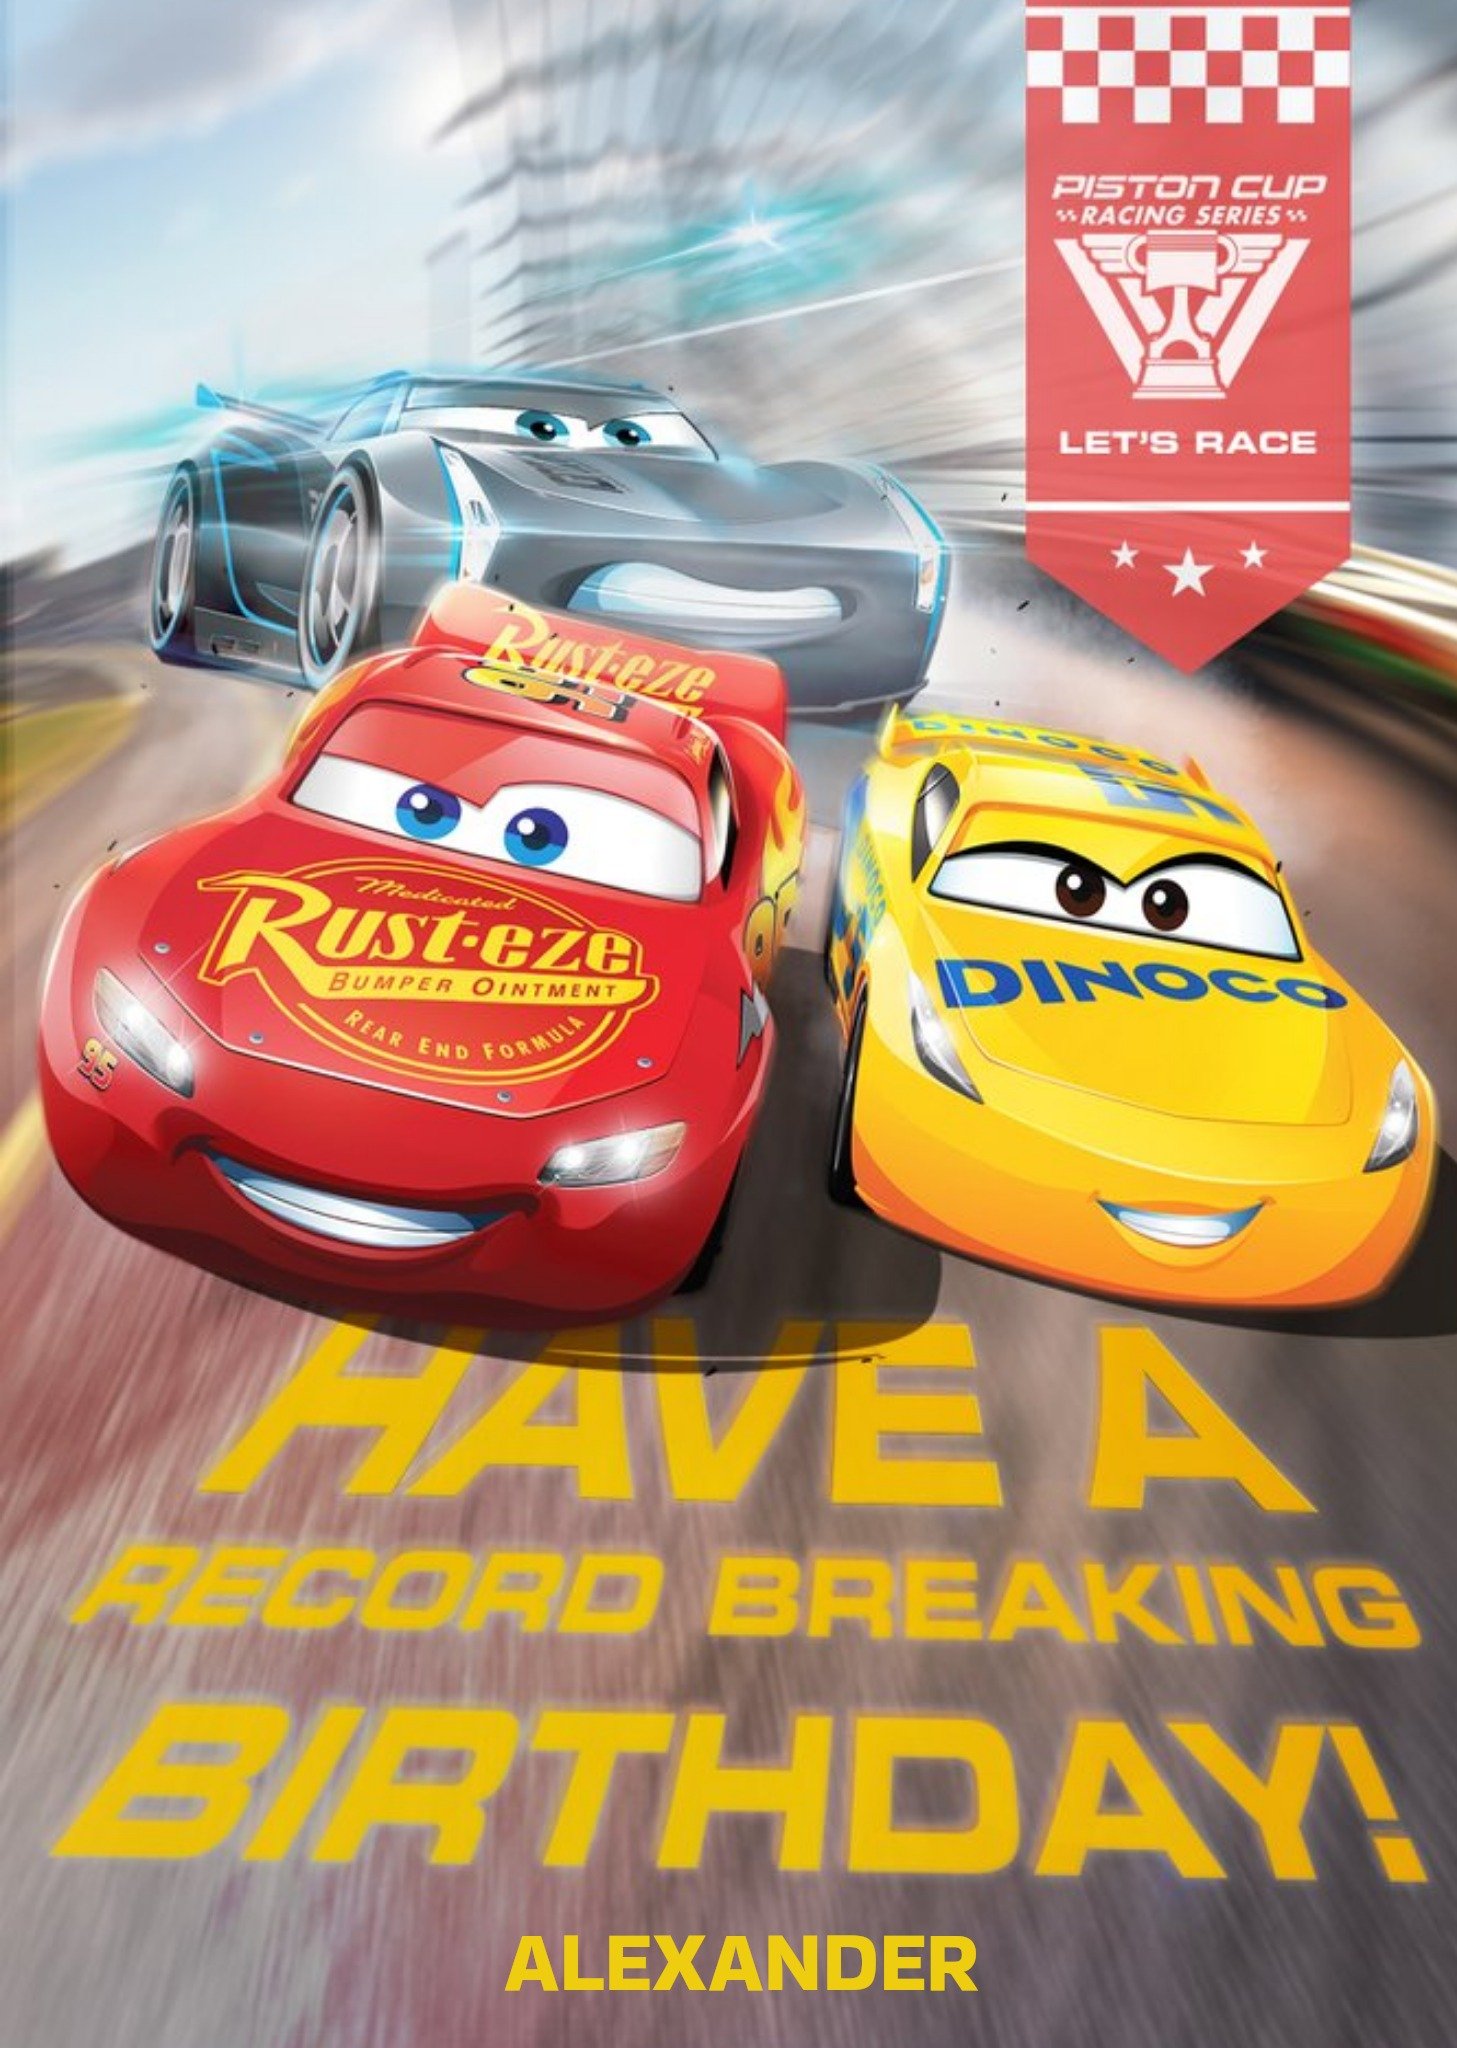 Disney Cars Have A Record Breaking Personalised Birthday Card Ecard